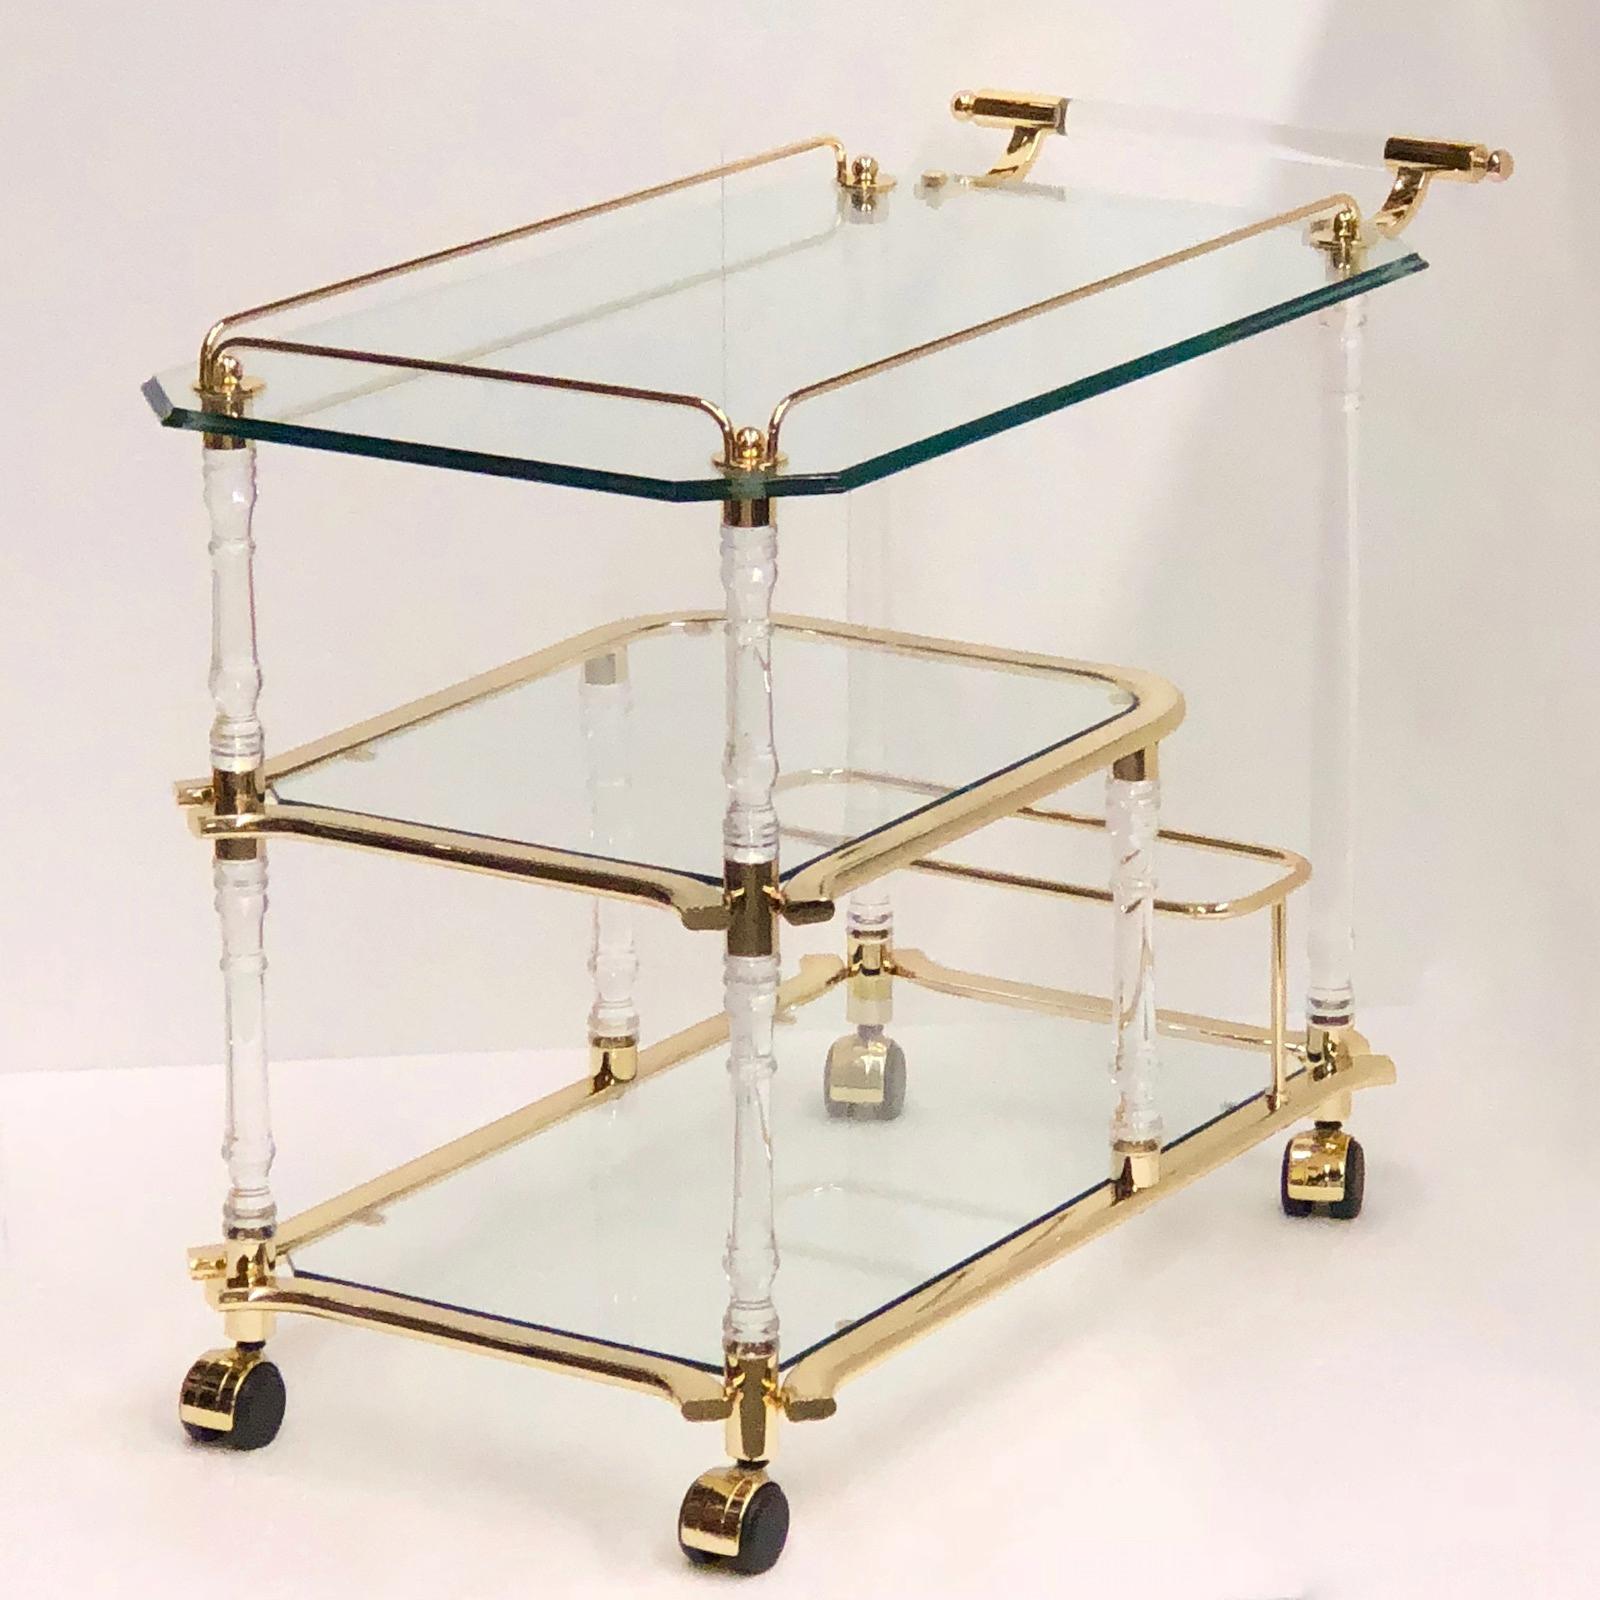 Offered is an absolutely stunning, 1980s bar cart, tea trolley or drinks stand. Three heavy glass plates, four Lucite columns, a Lucite handle and a gold plated frame gives this piece a classy statement. A nice addition to every room or a patio.